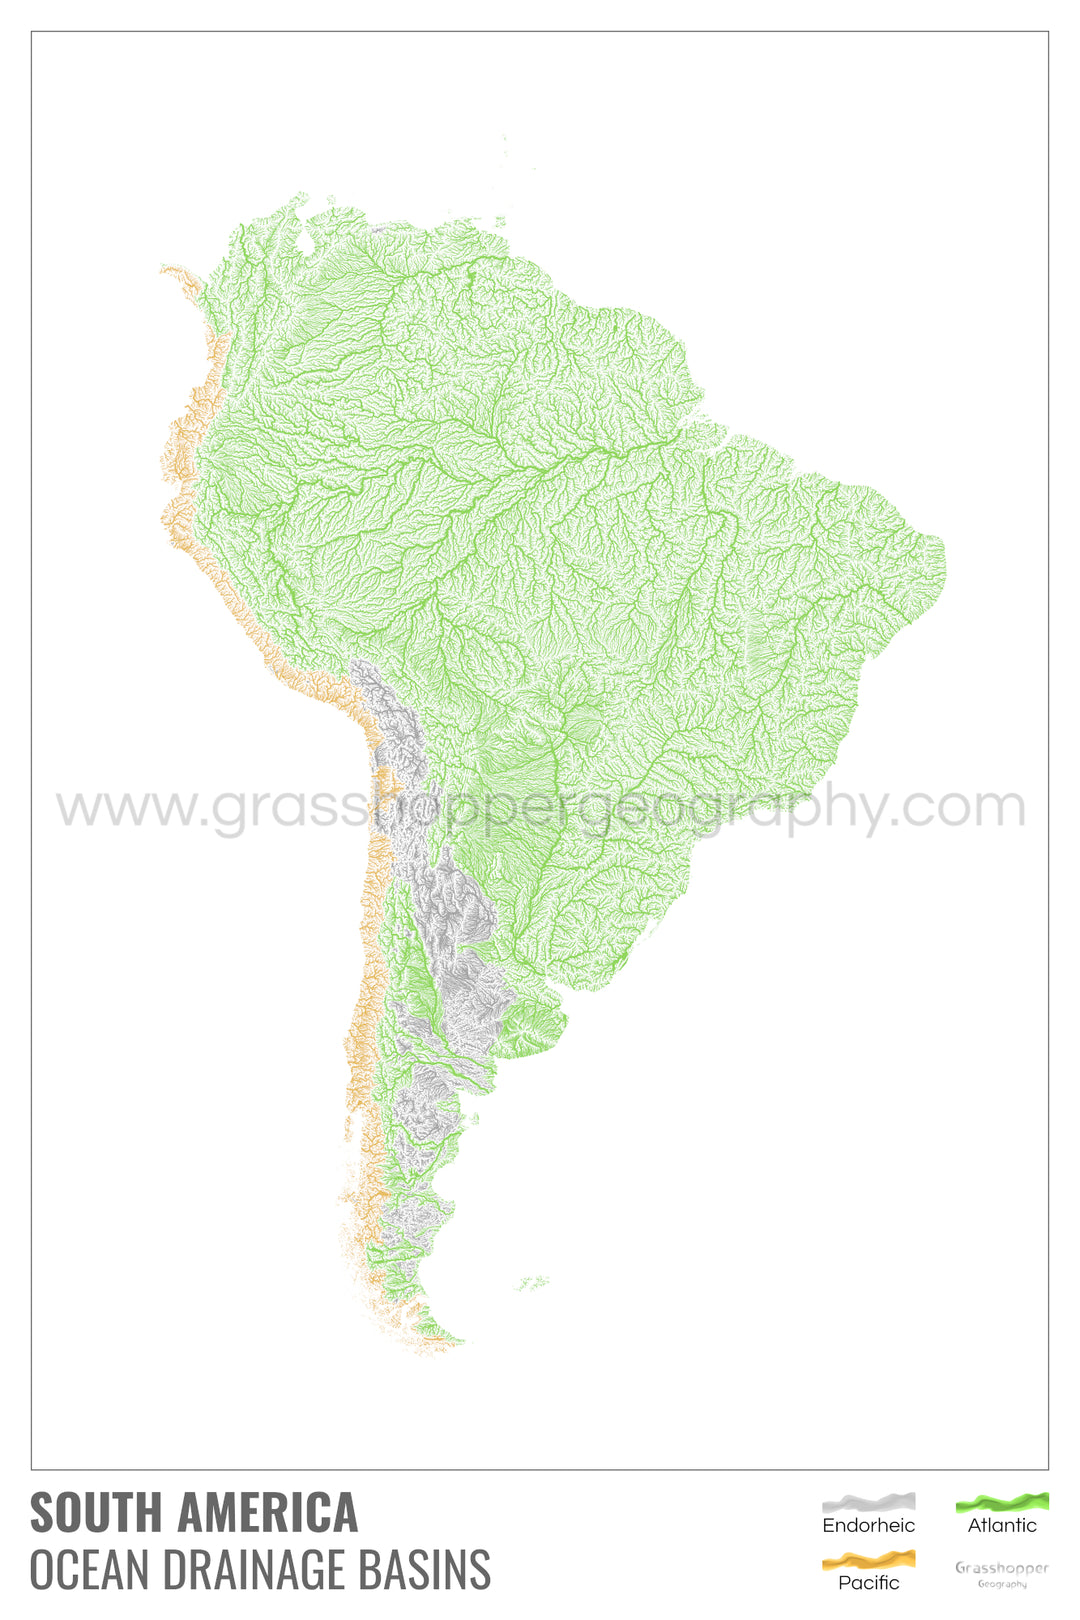 South America - Ocean drainage basin map, white with legend v1 - Photo Art Print